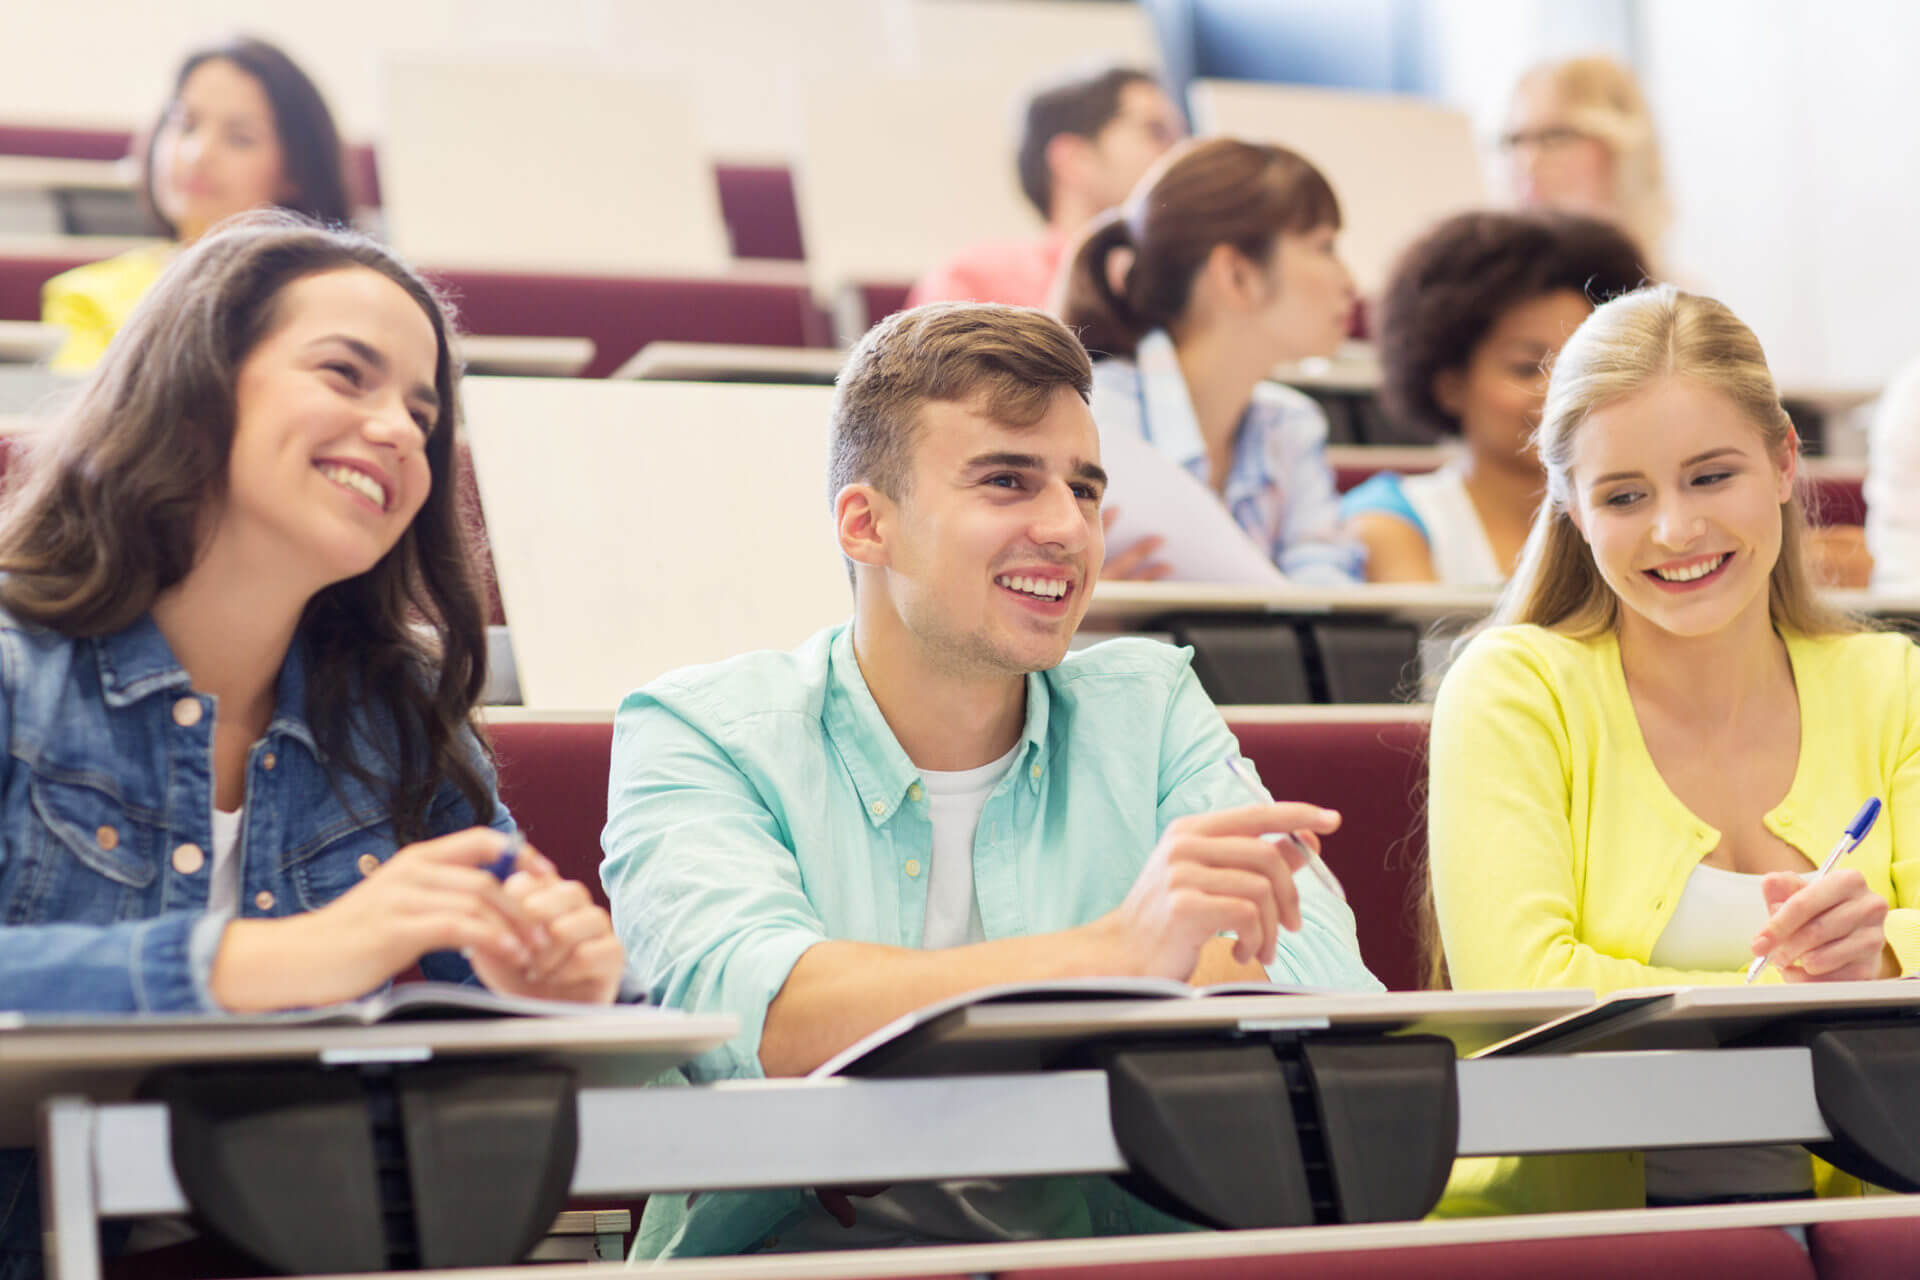 PPC marketing in higher education